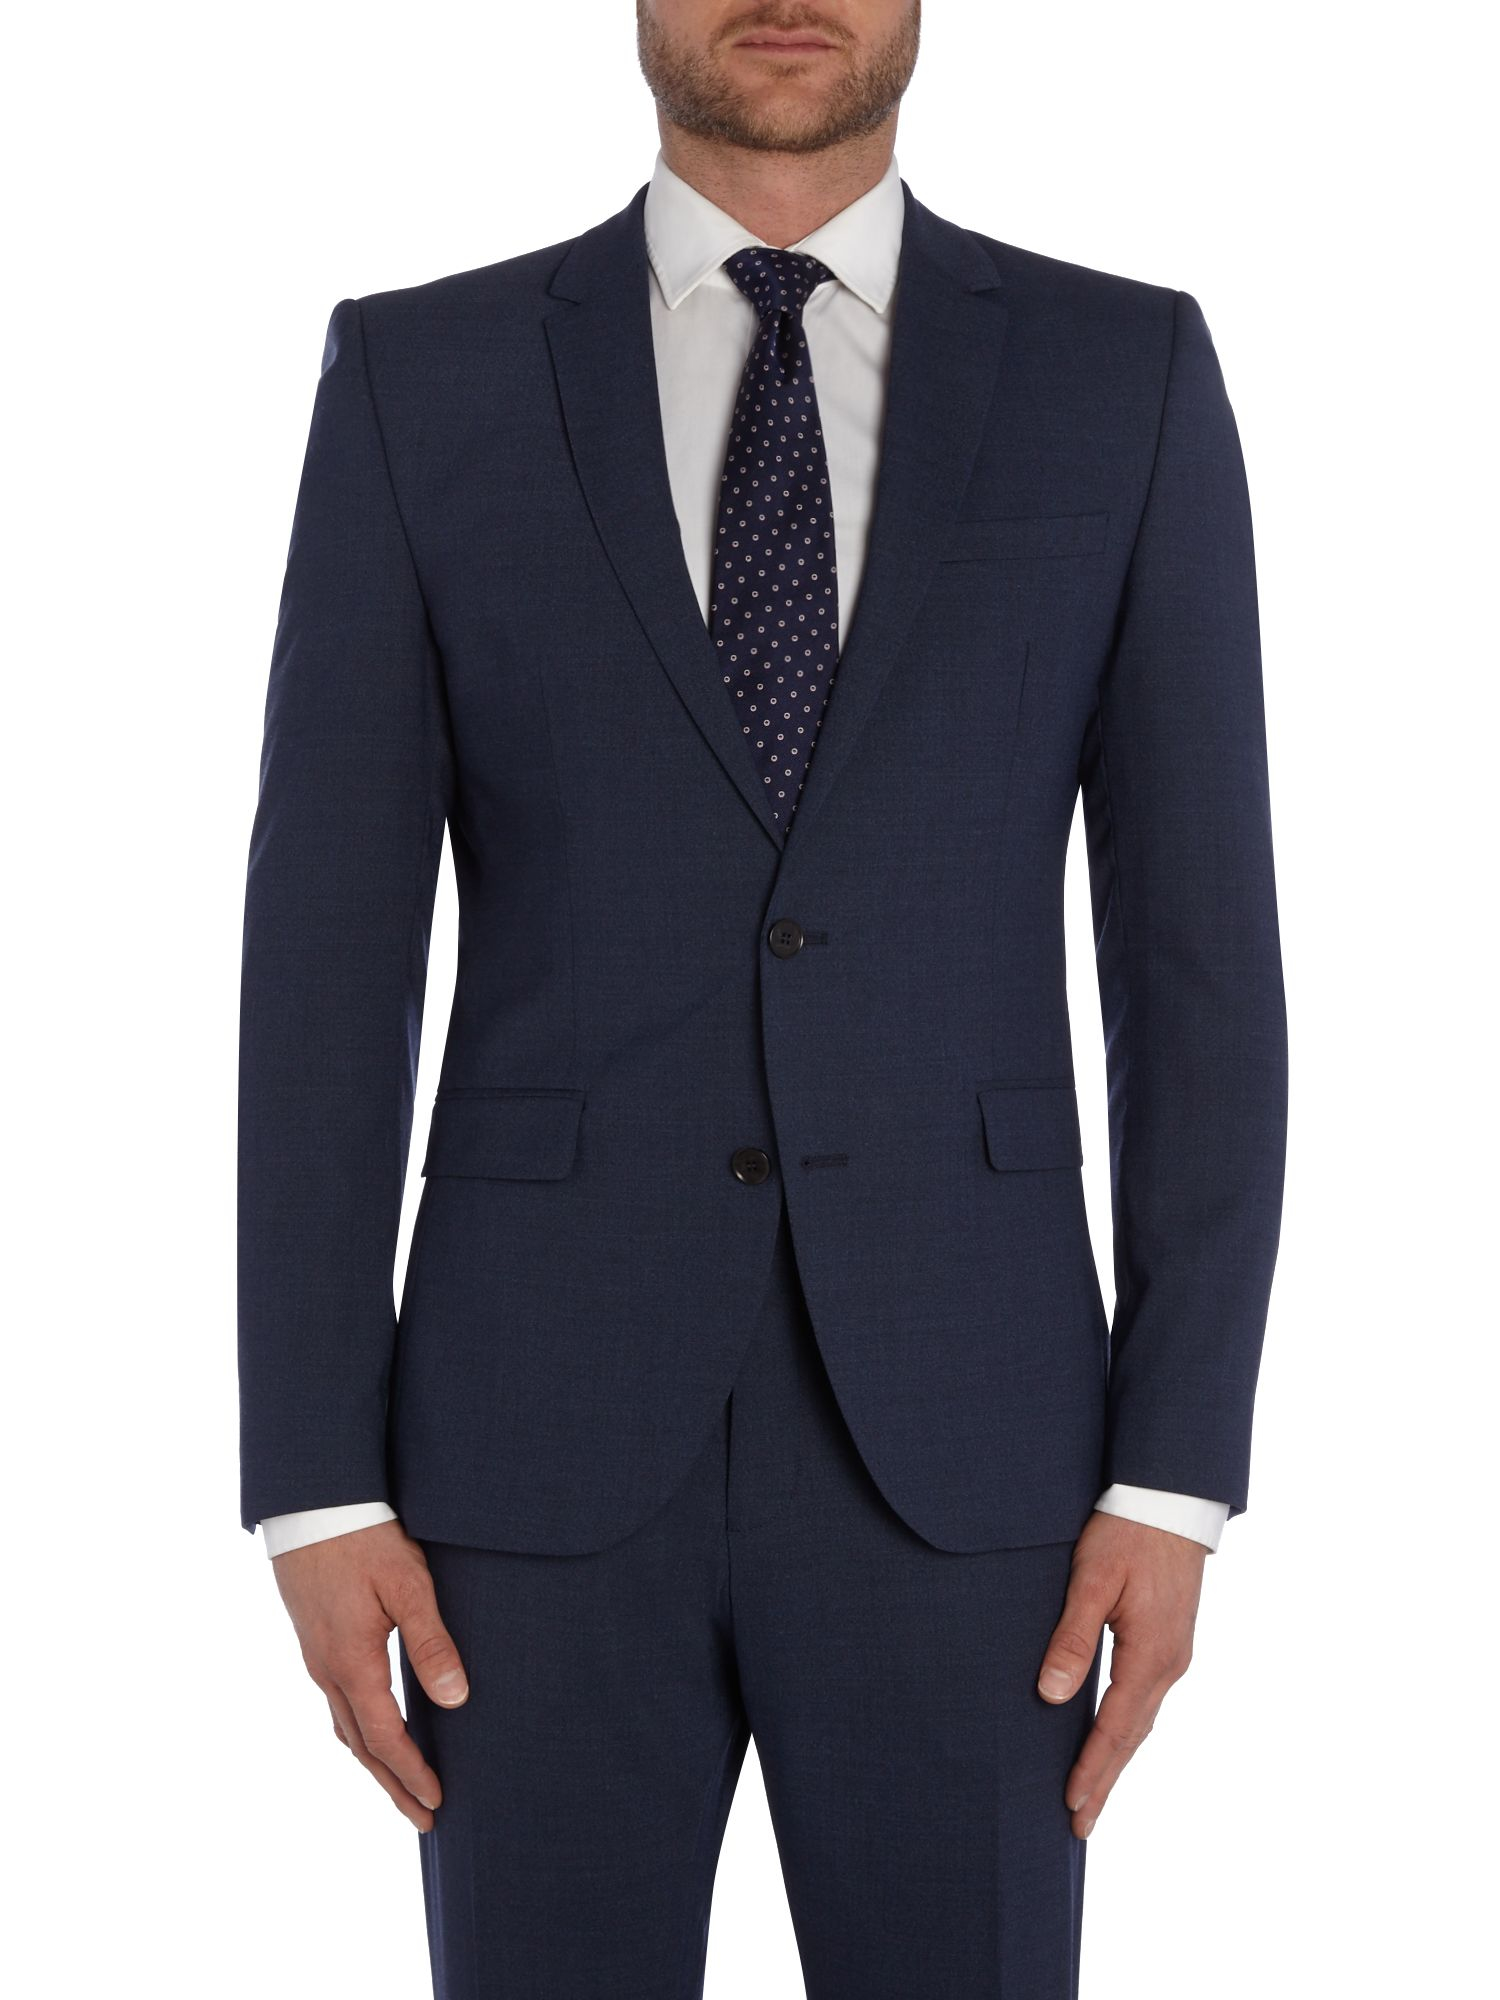 SELECTED Synthetic One Mylo Gib Suit Jacket in Navy (Blue) for Men - Lyst